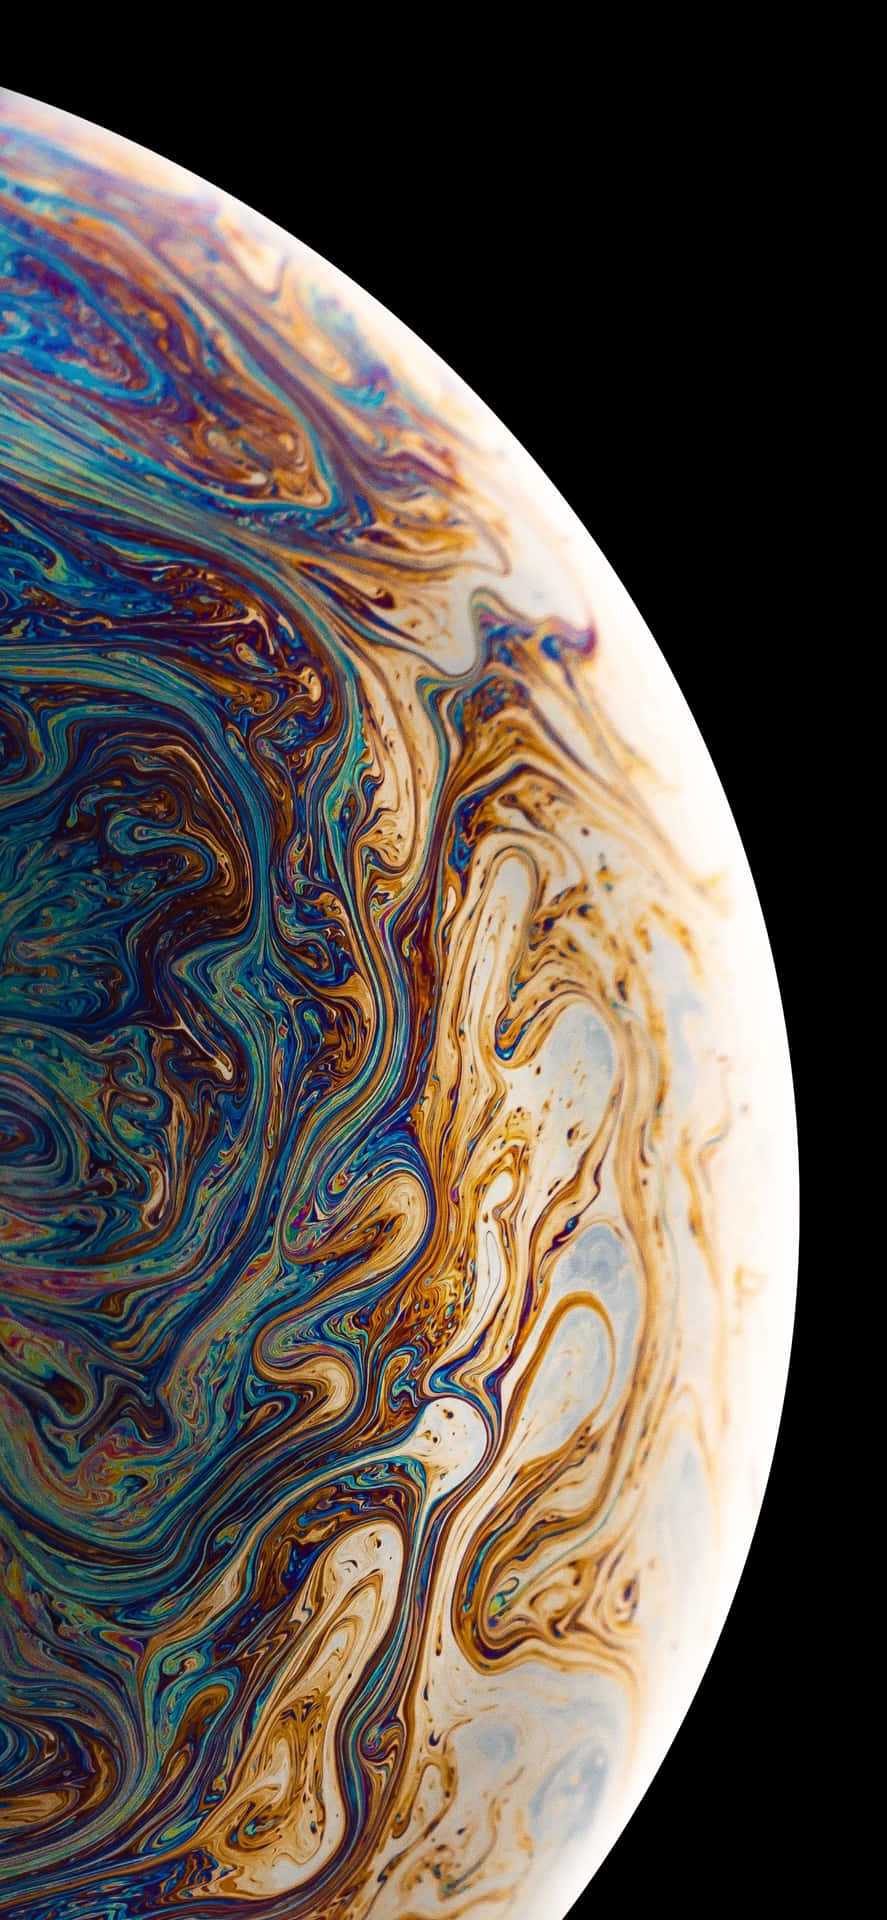 A Close Up Of A Colorful Swirled Object Background